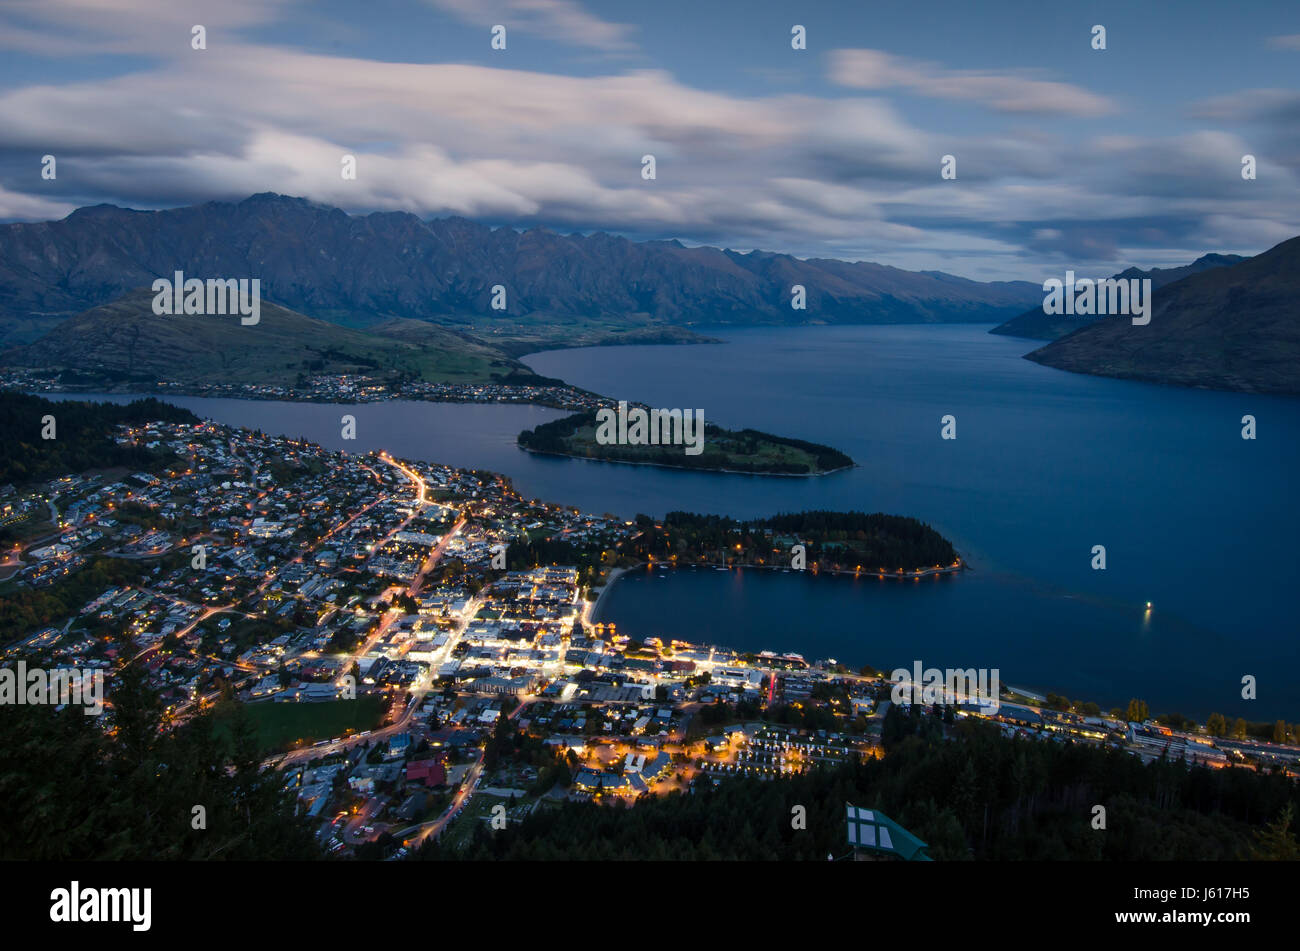 Night scene of Queenstown from Skyline Gondola, south island of New Zealand. Stock Photo